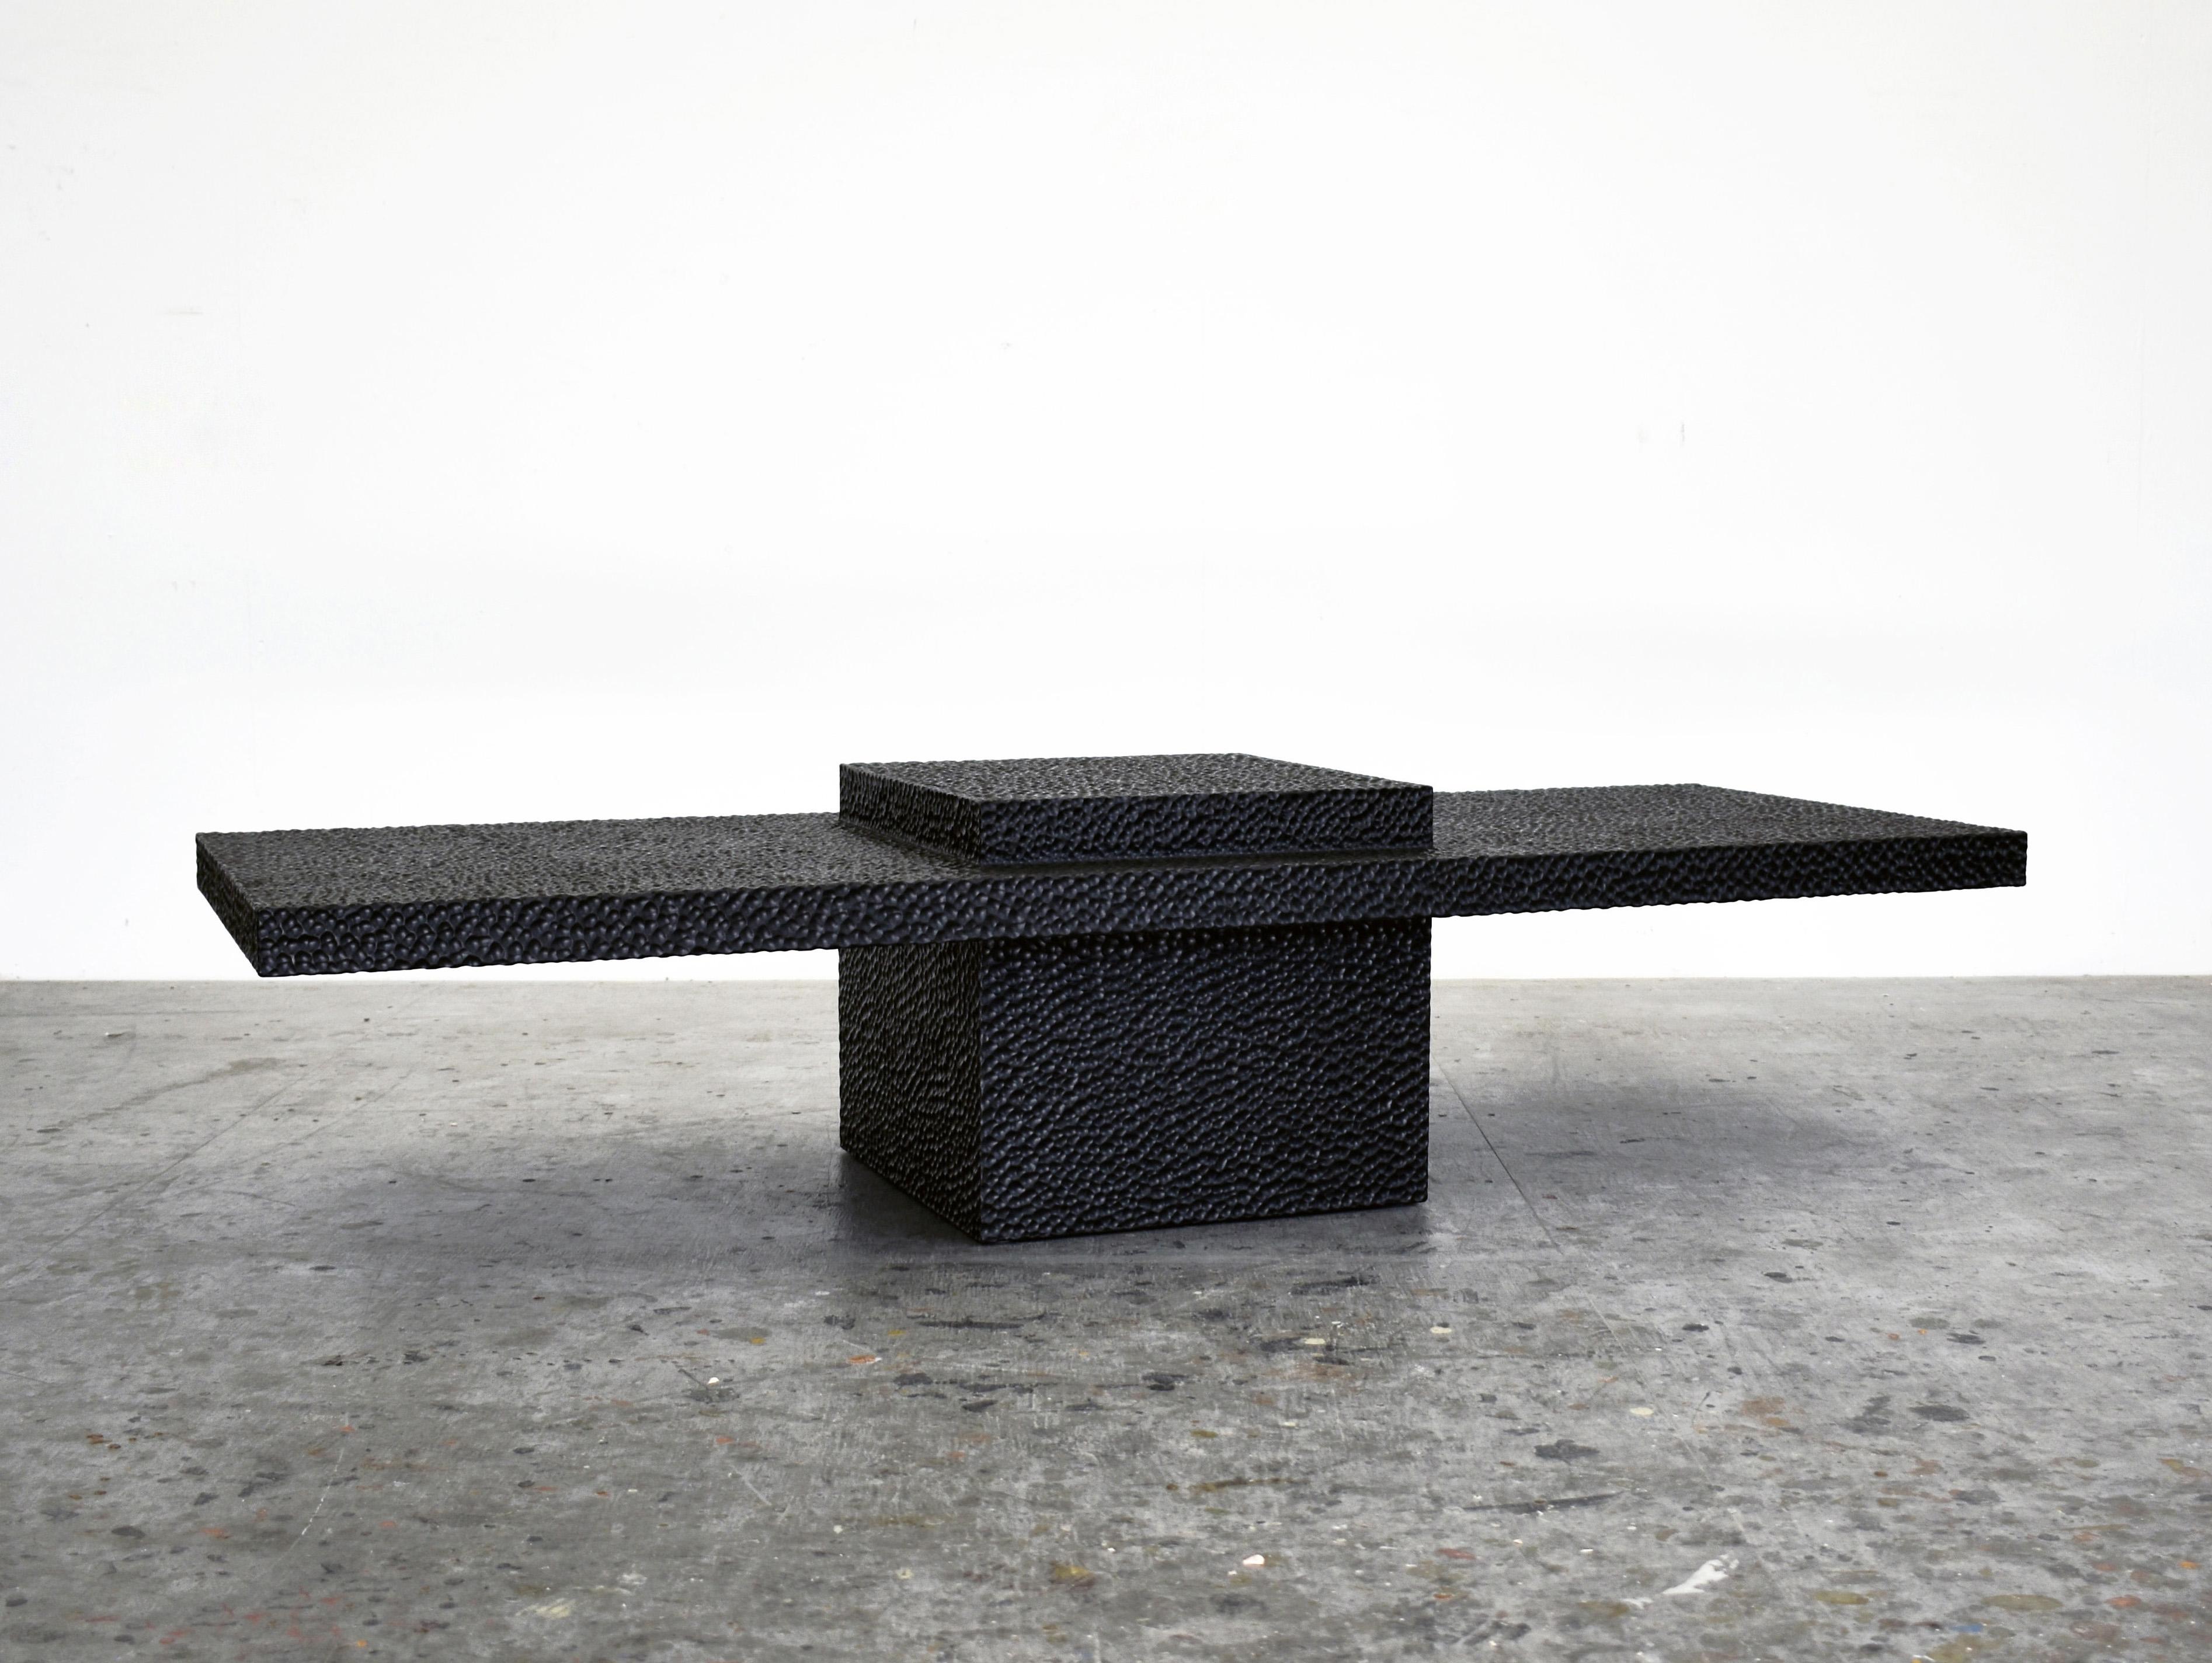 T1 coffee table by John Eric Byers
Dimensions: 35.5 x 152.4 x 55.9 cm
Materials: carved blackened maple

All works are individually handmade to order.

John Eric Byers creates geometrically inspired pieces that are minimal, emotional, and